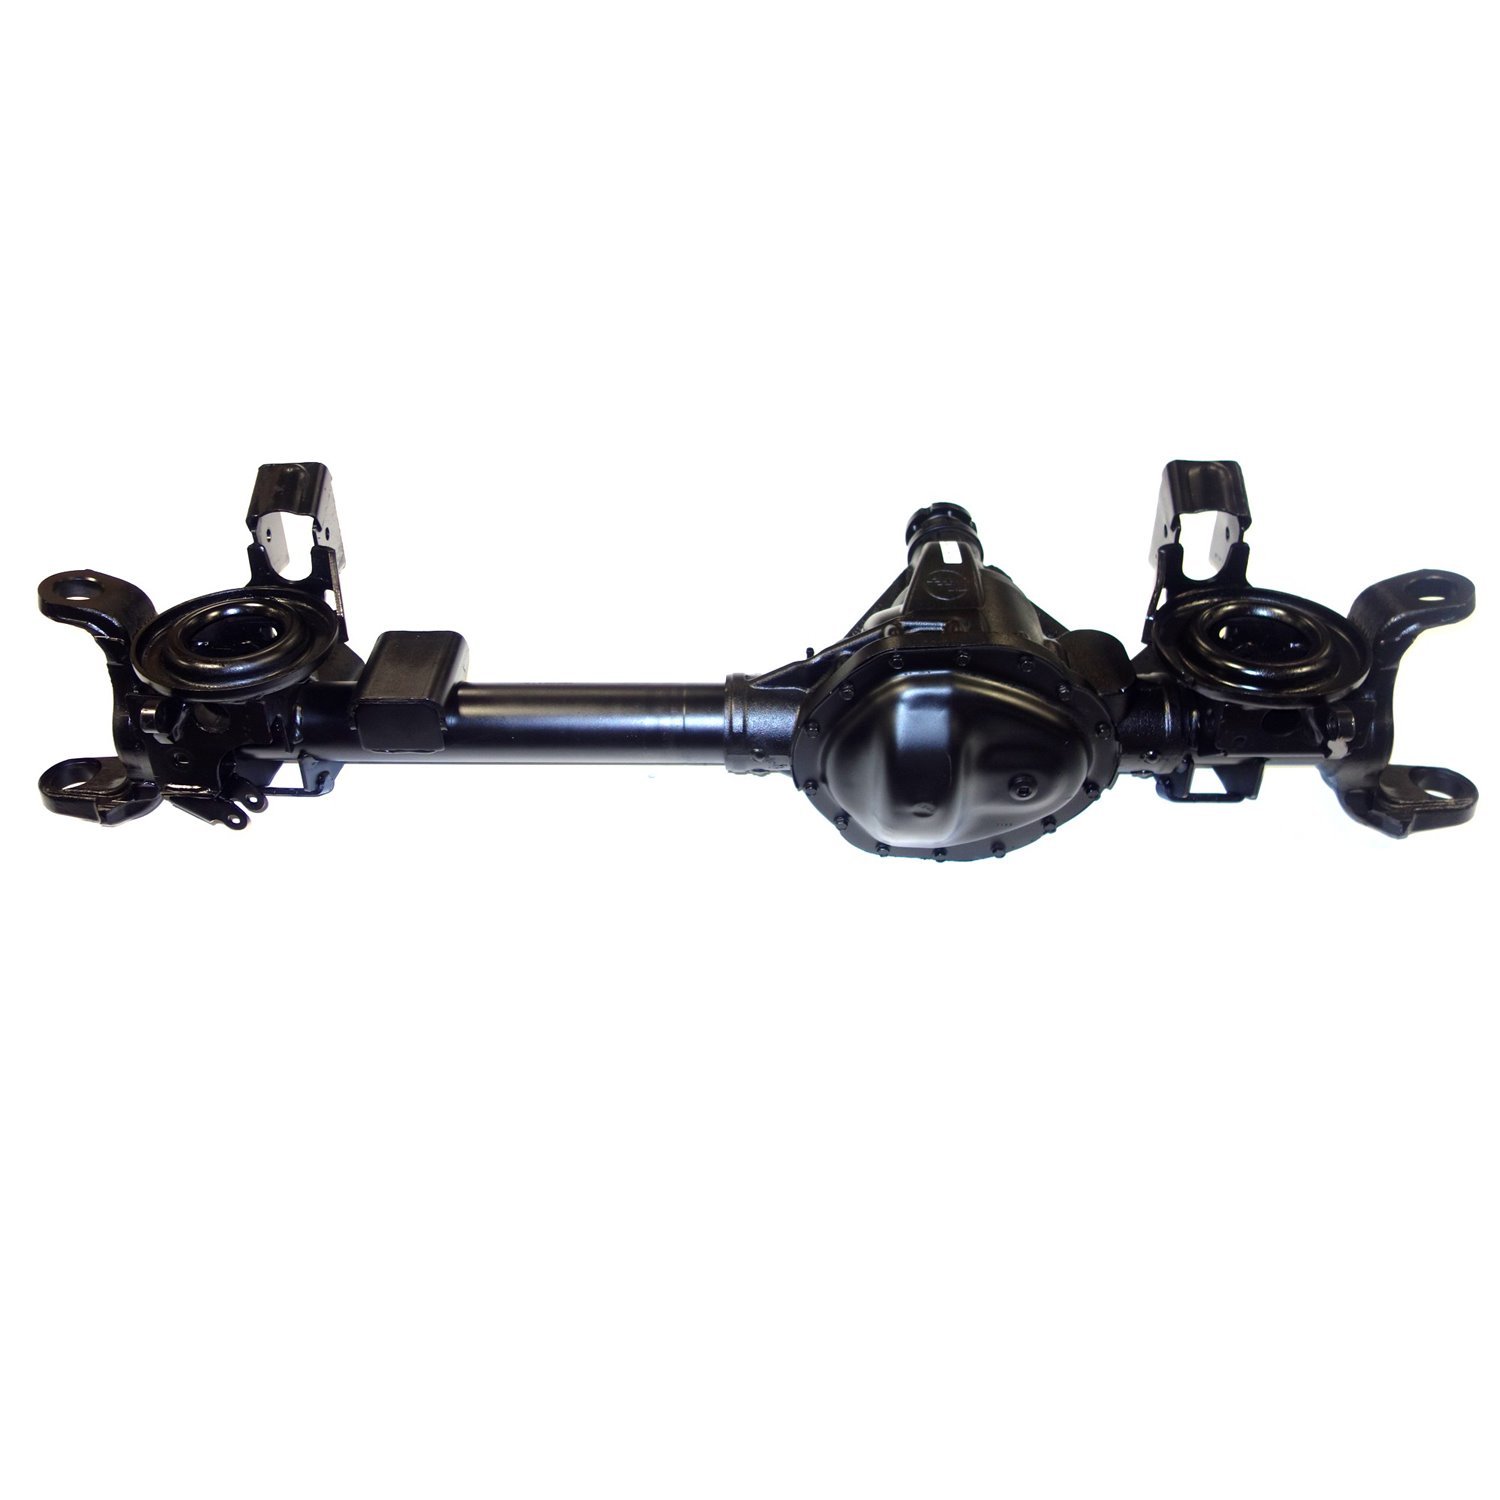 Remanufactured Complete Axle Assembly for Chy 9.25" Front 2009 Ram 1500 3.42